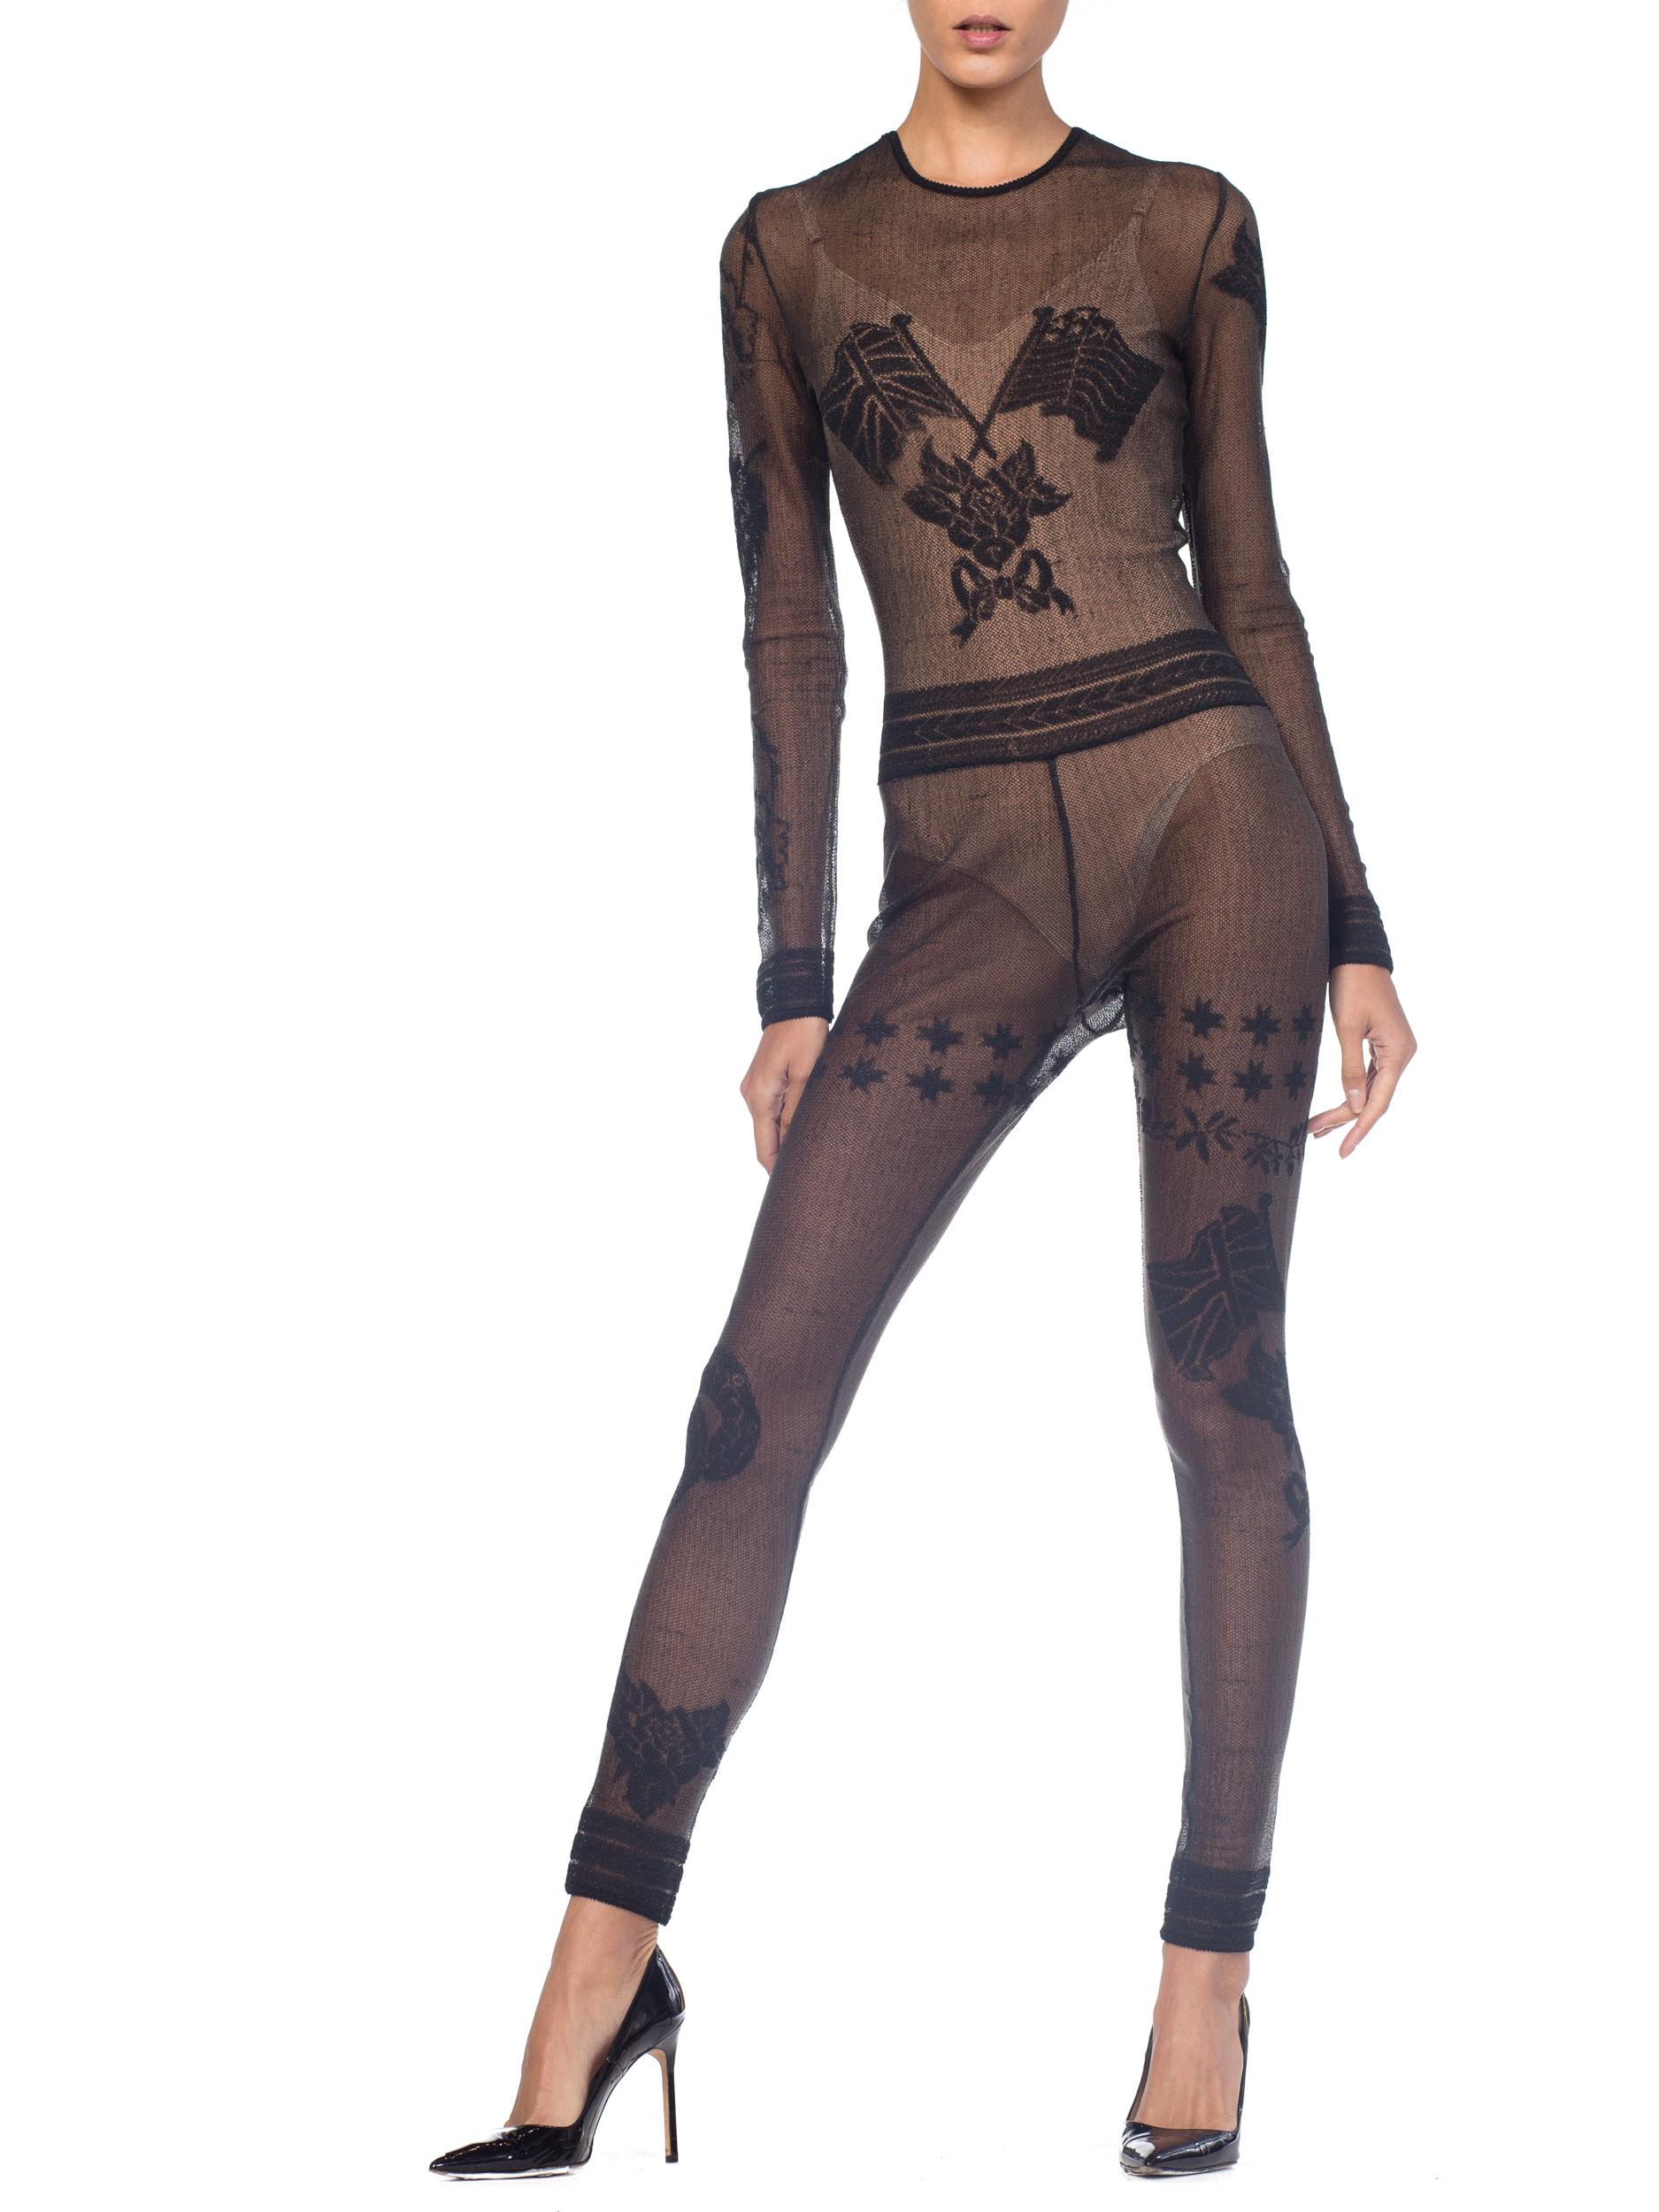 1990S JOHN GALLIANO Sheer Knit Bodysuit Jumpsuit From The Siouxsie Sphinx Colle 7